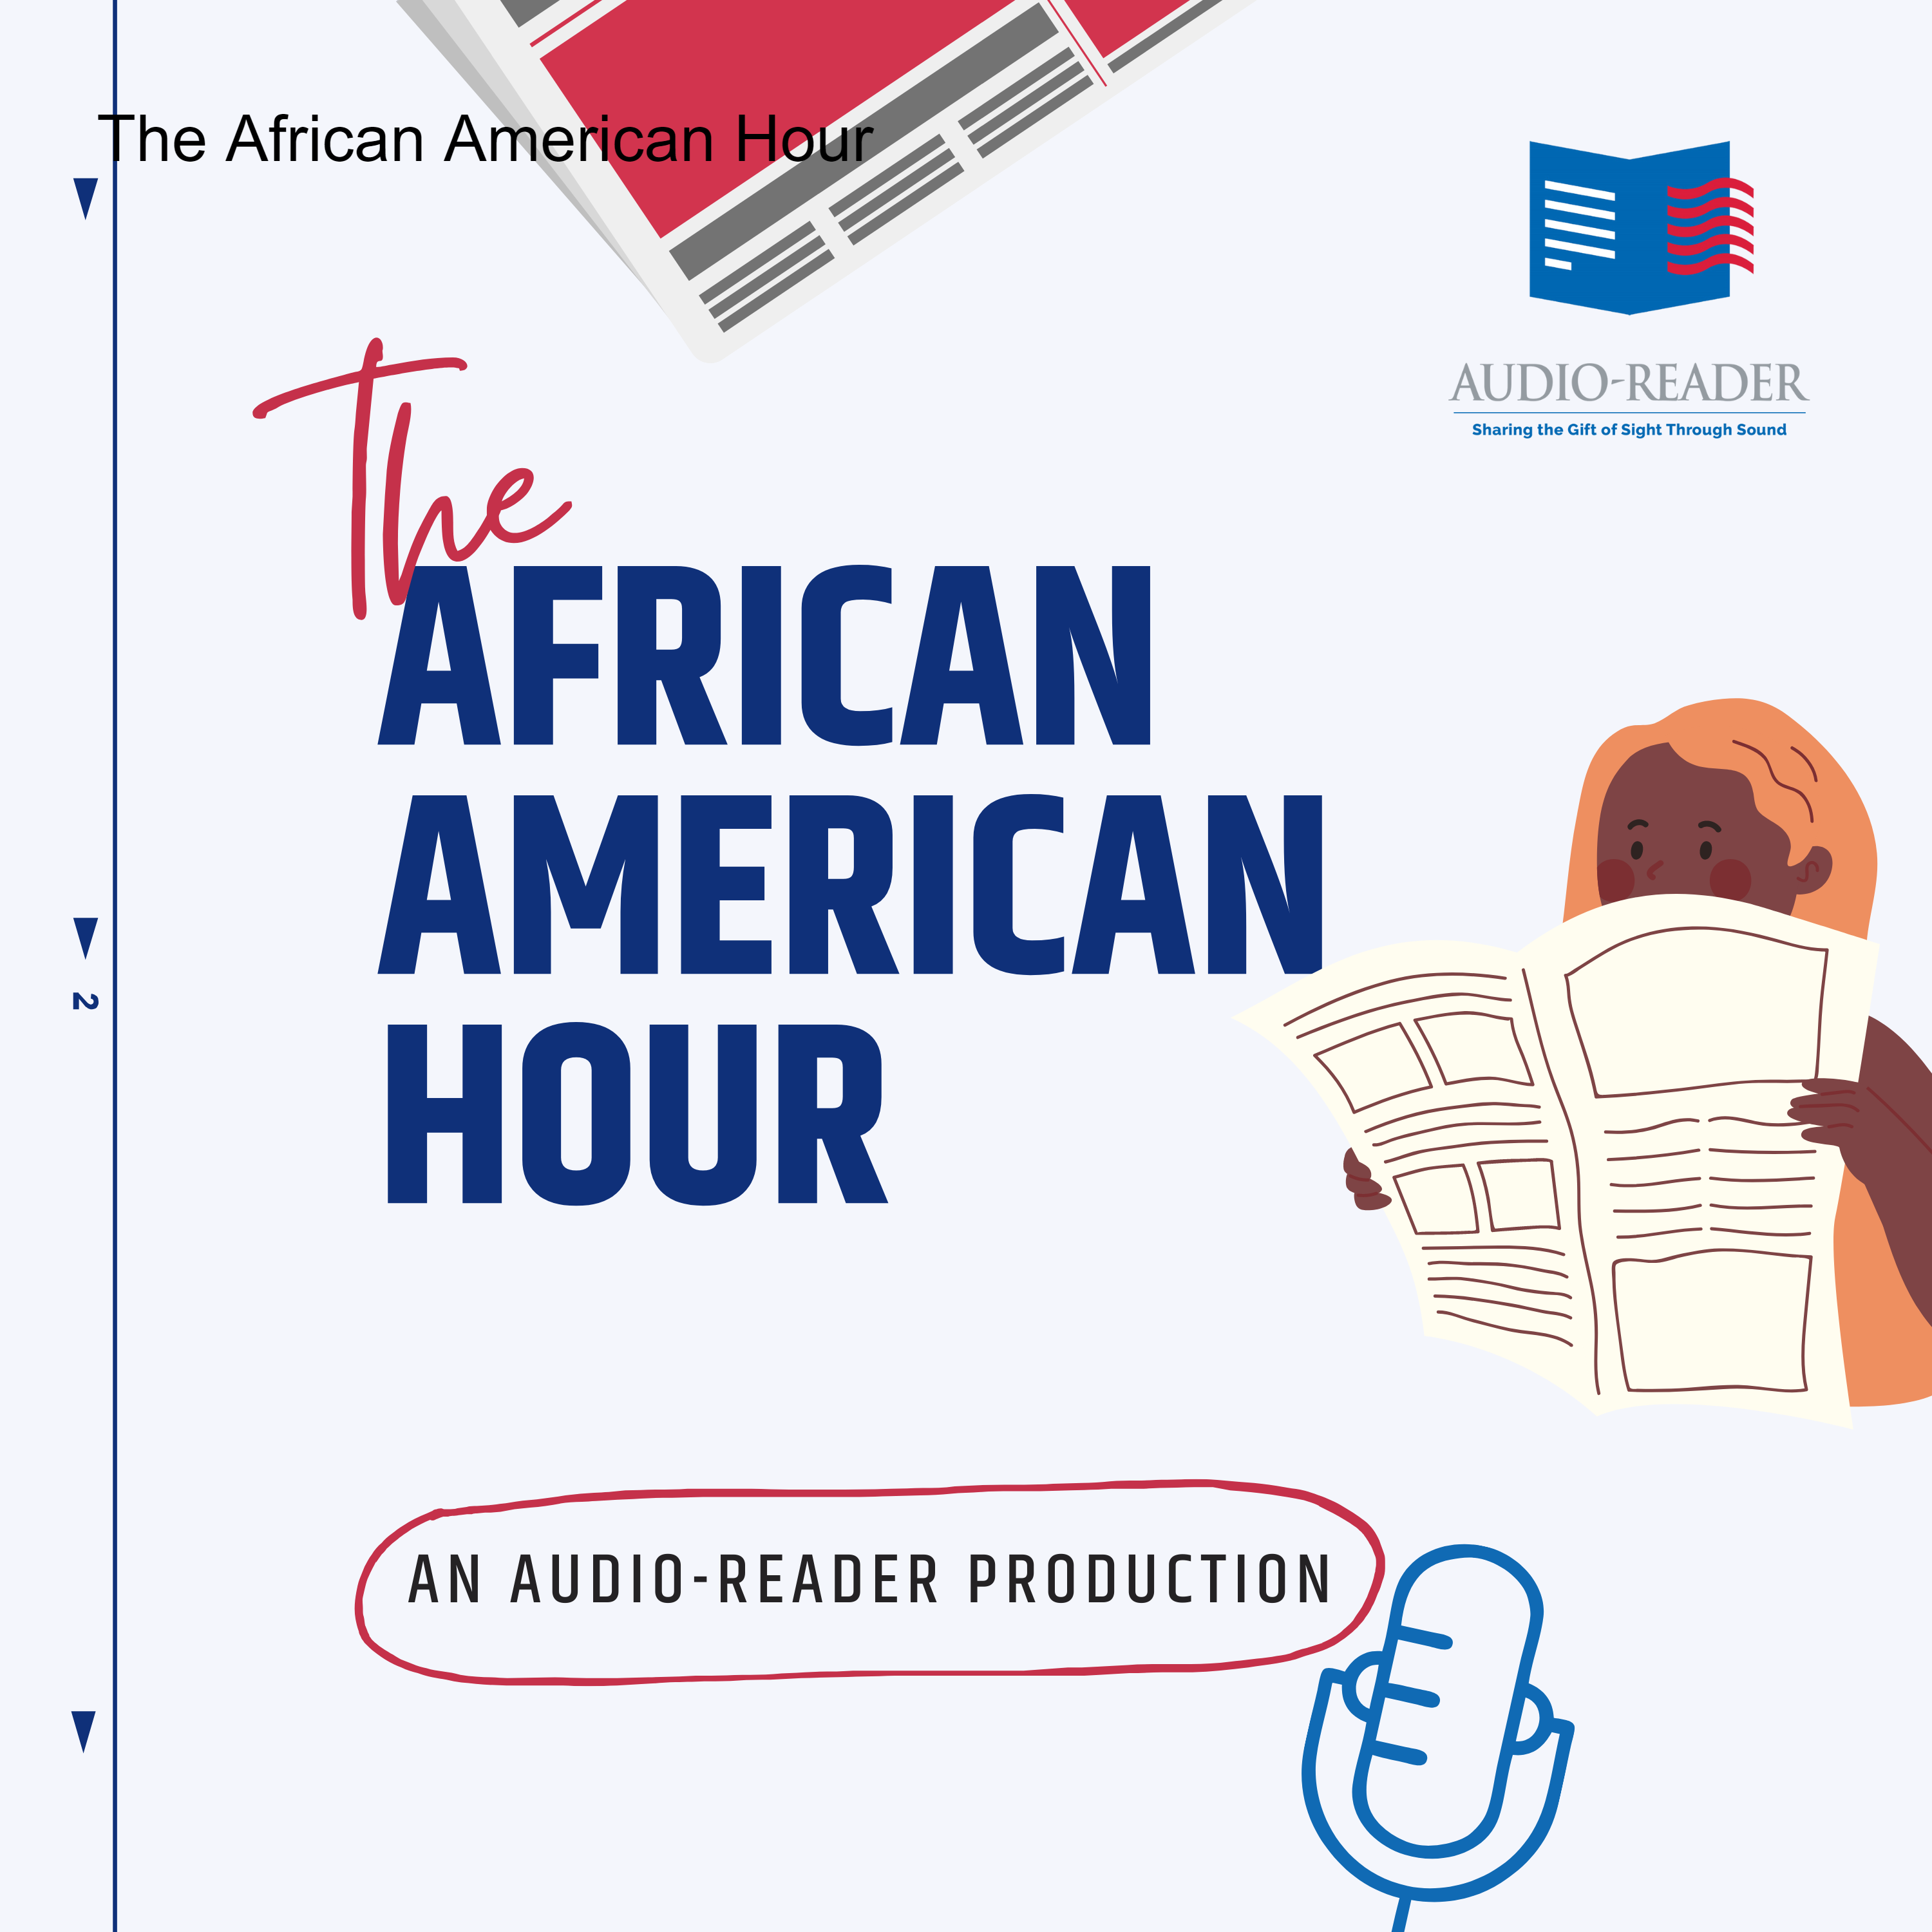 The African American Hour